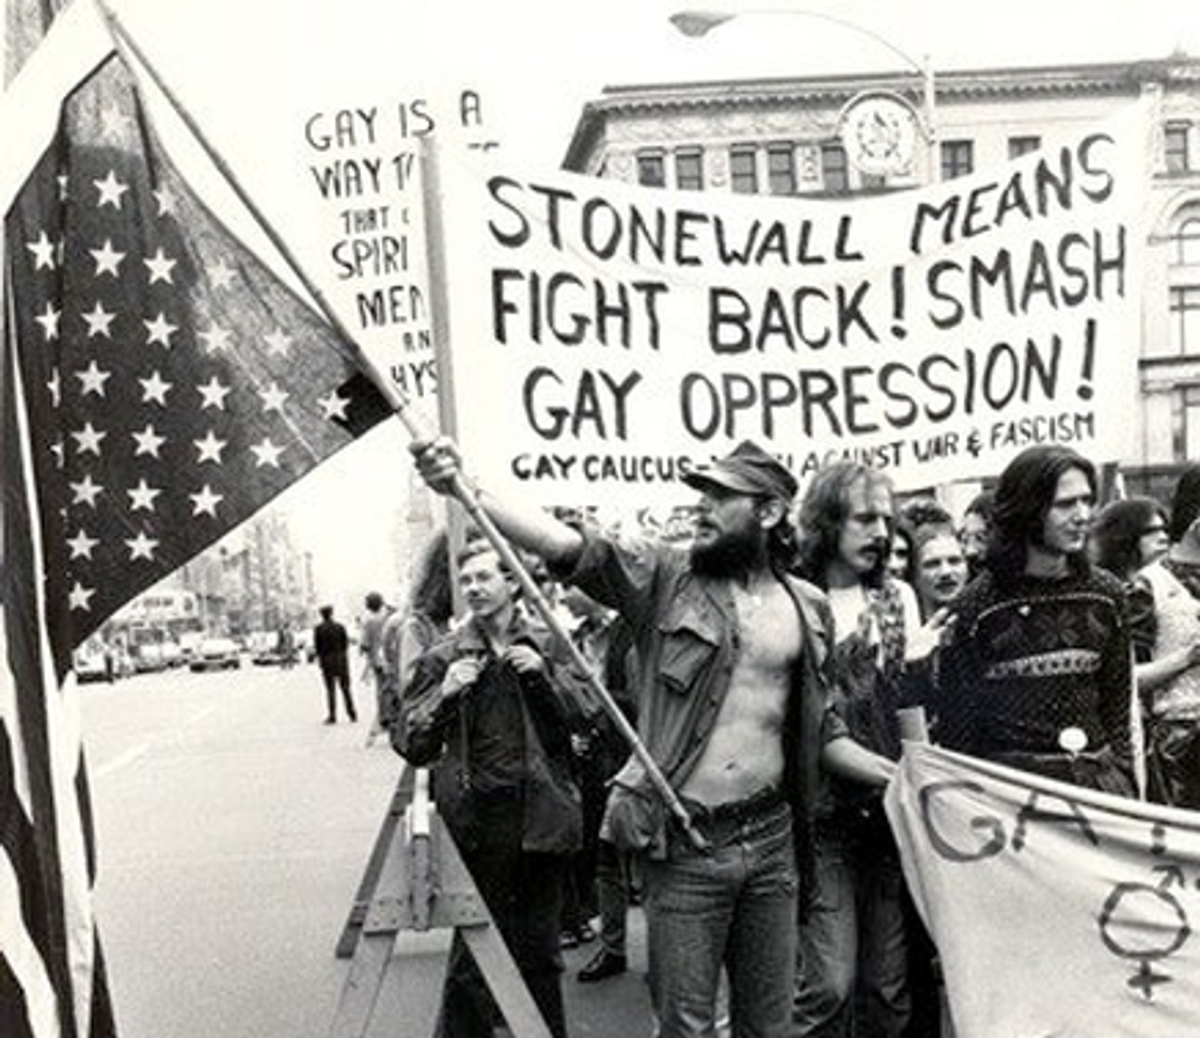 Gay Rights, Feminism, and Equality: Teaching The True History of America